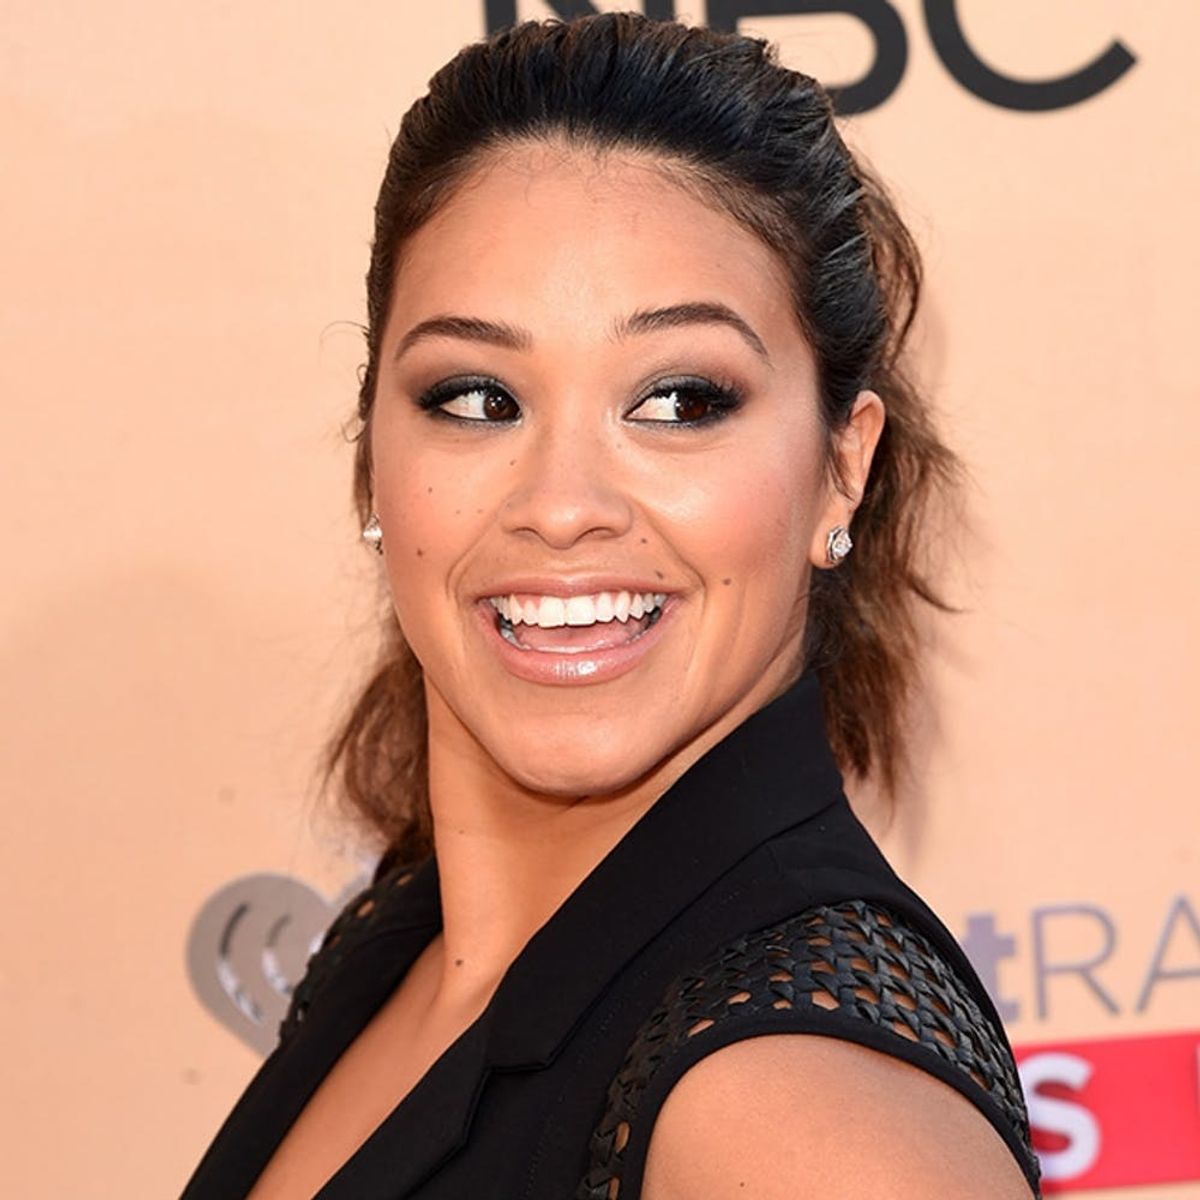 Jane the Virgin Star Gina Rodriguez Is the Face of This New Fashion Campaign